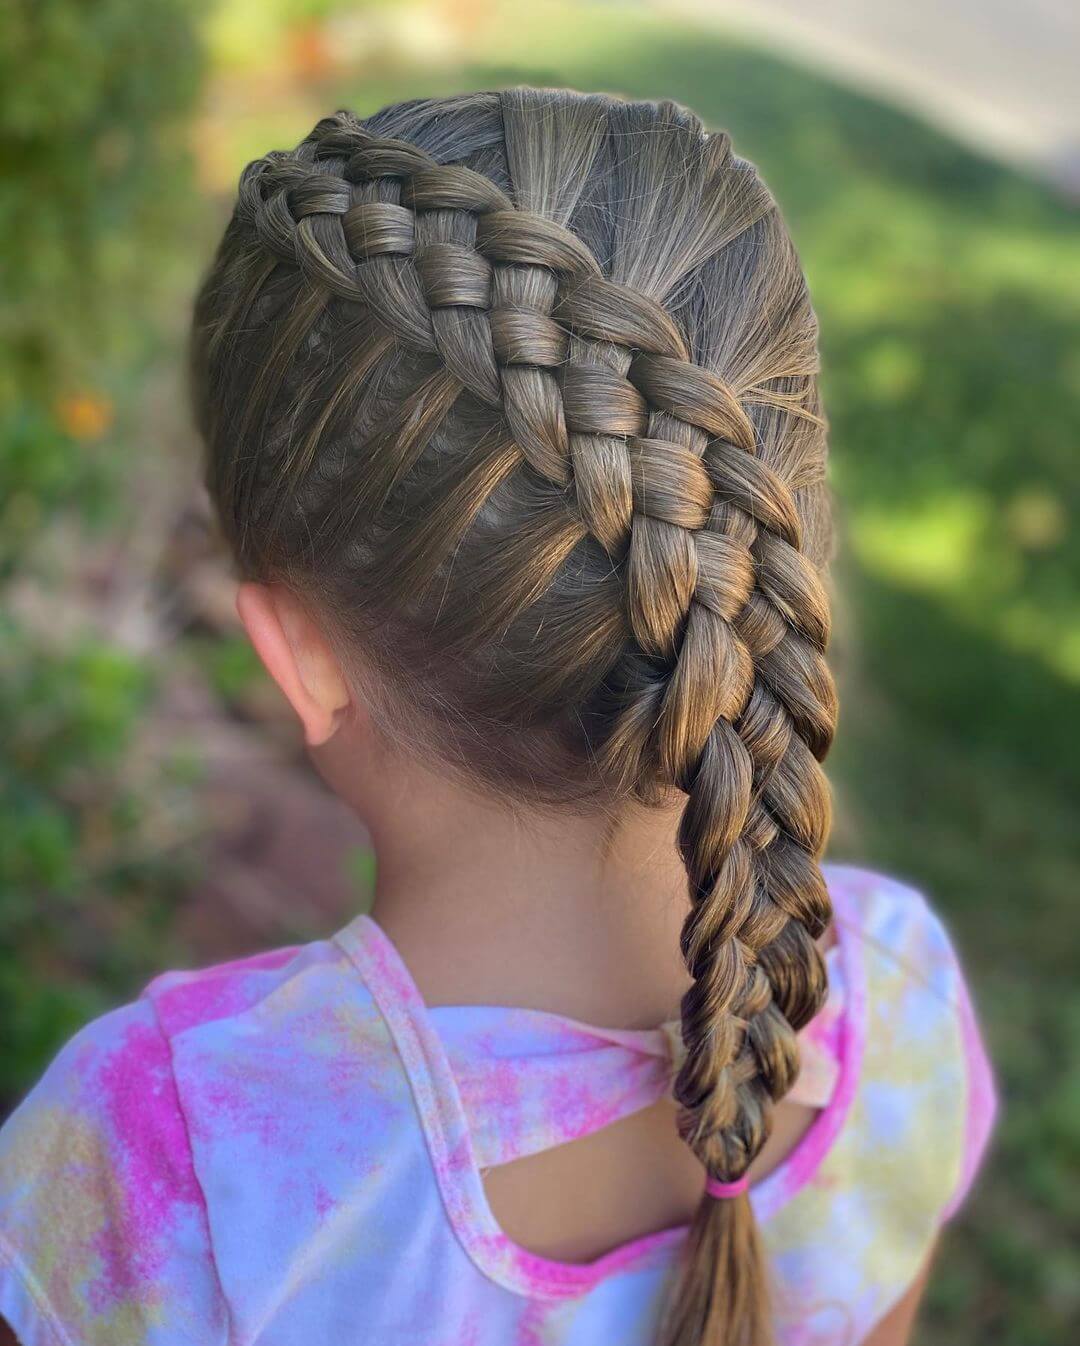 Thick knotted braid hairstyle for kids